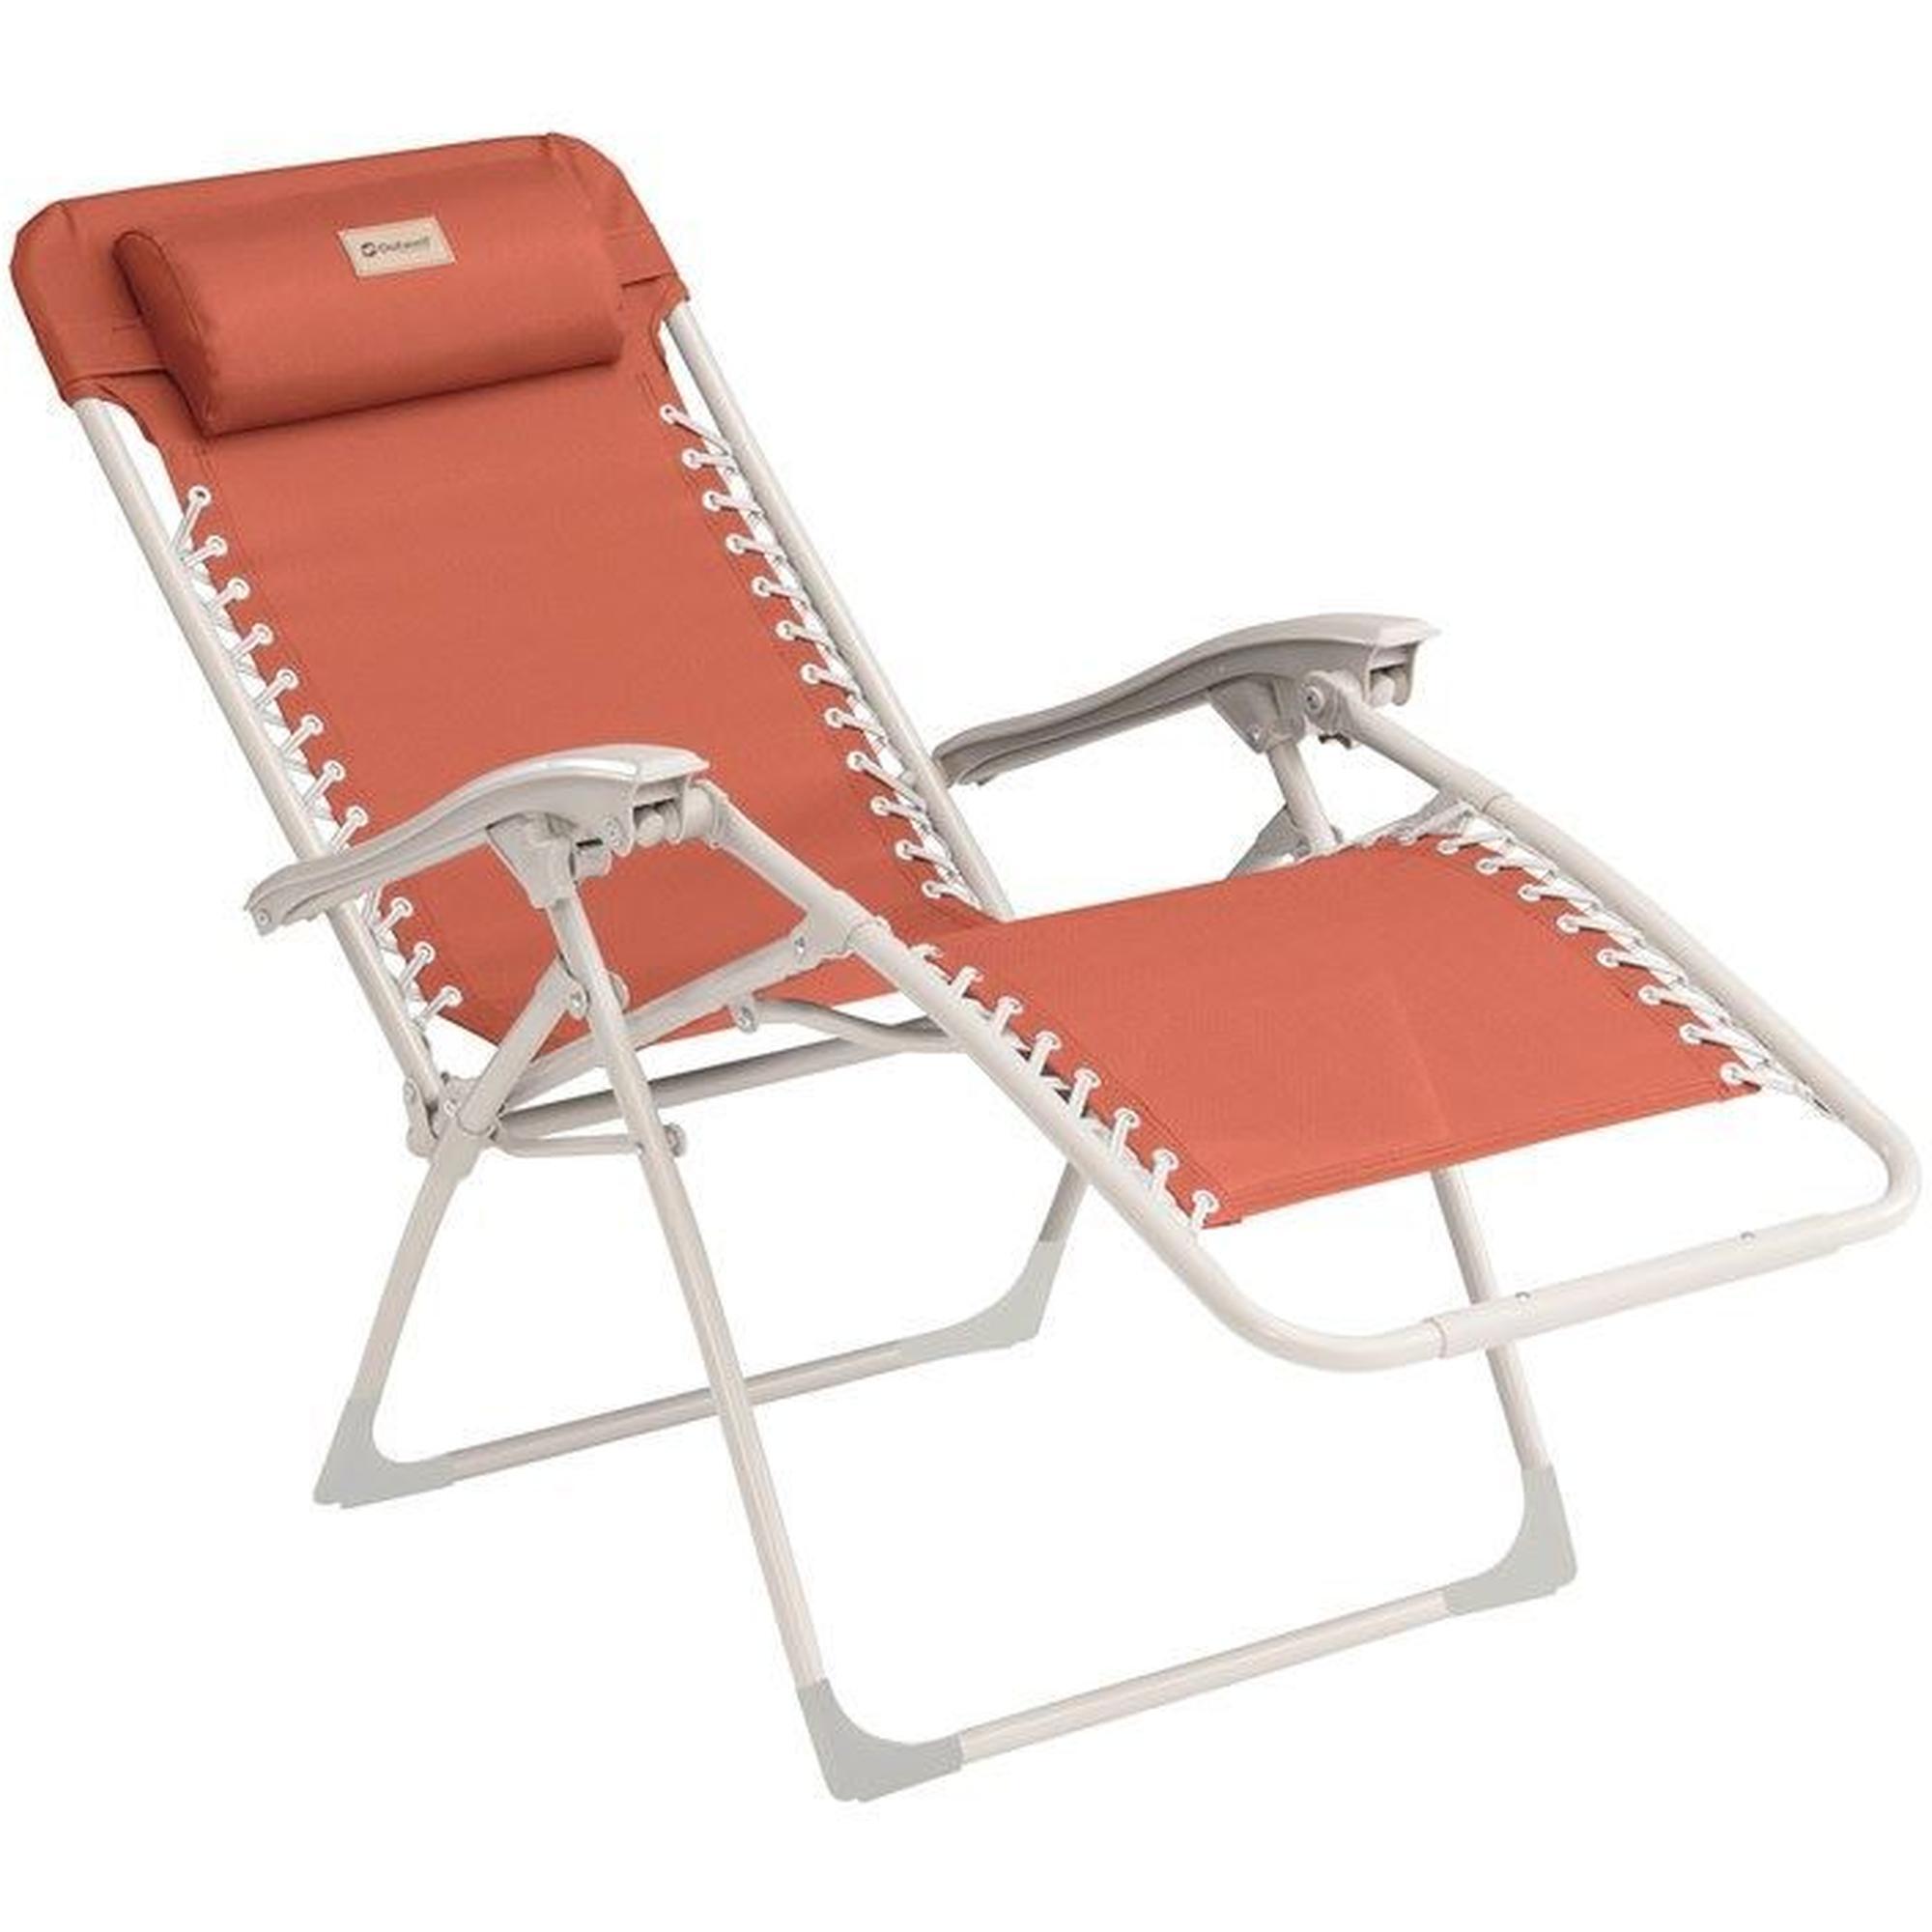 Outwell Ramsgate Folding Relaxer Lounger - Warm Red 1/2